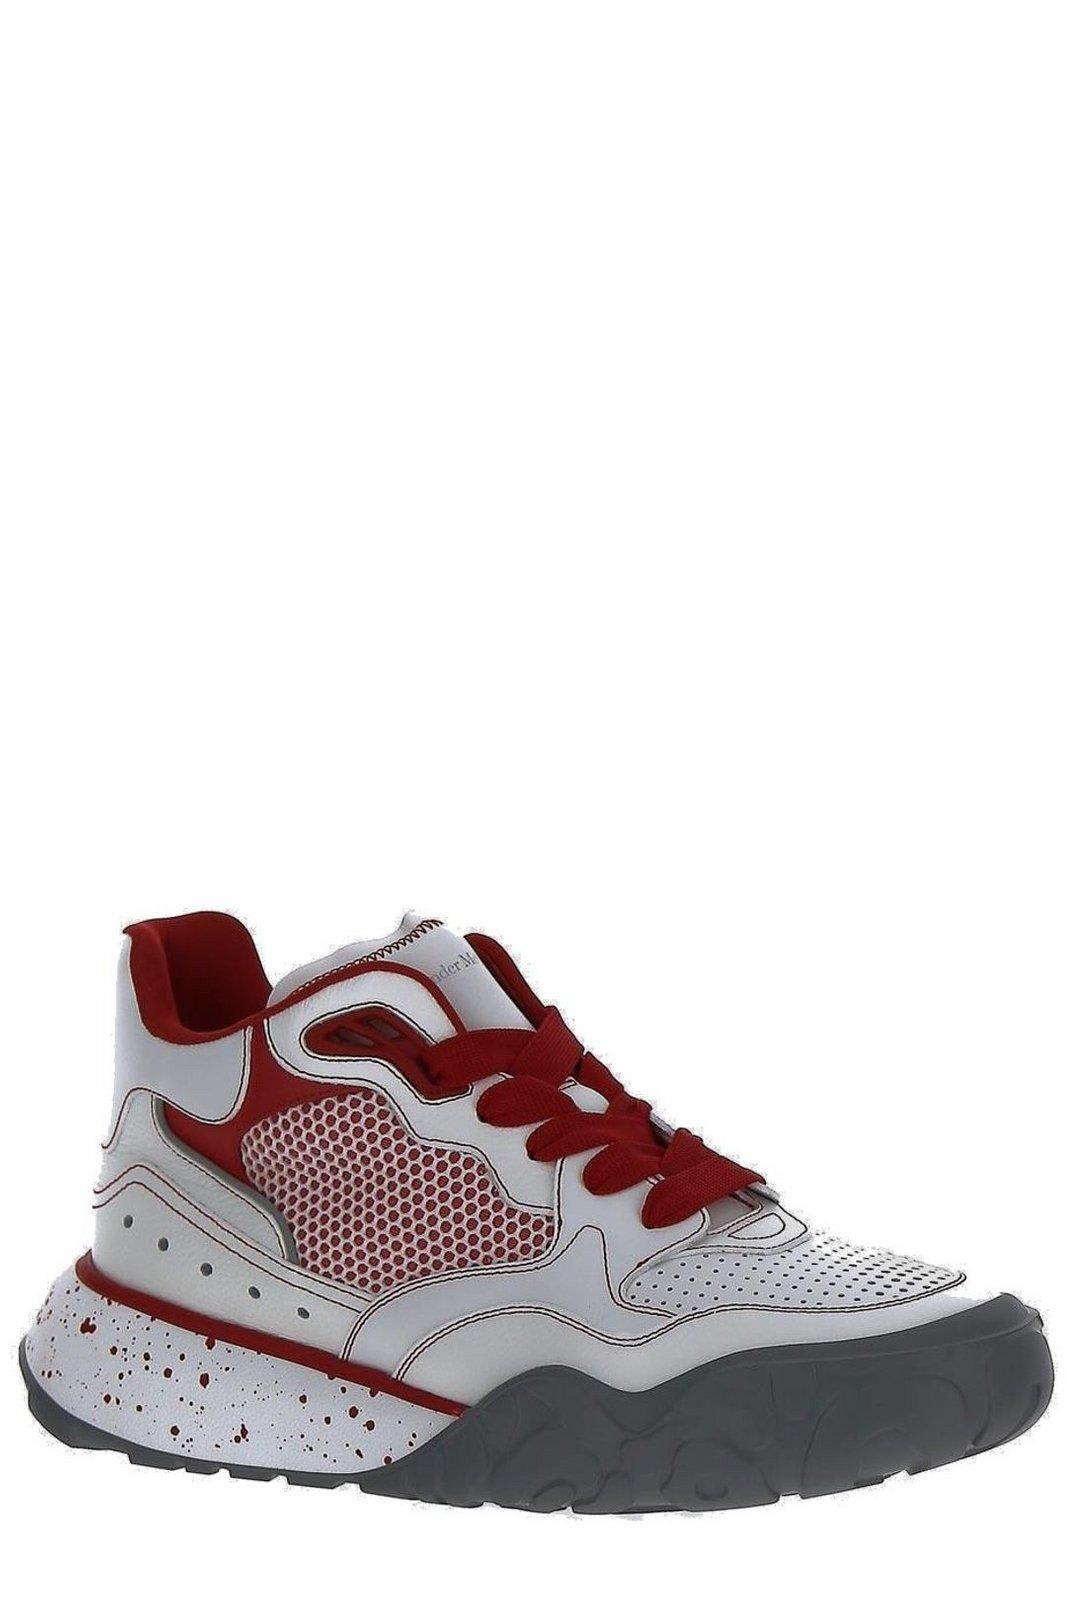 Shop Alexander Mcqueen Court Trainer Mesh Panelled Chunky Sneakers In White